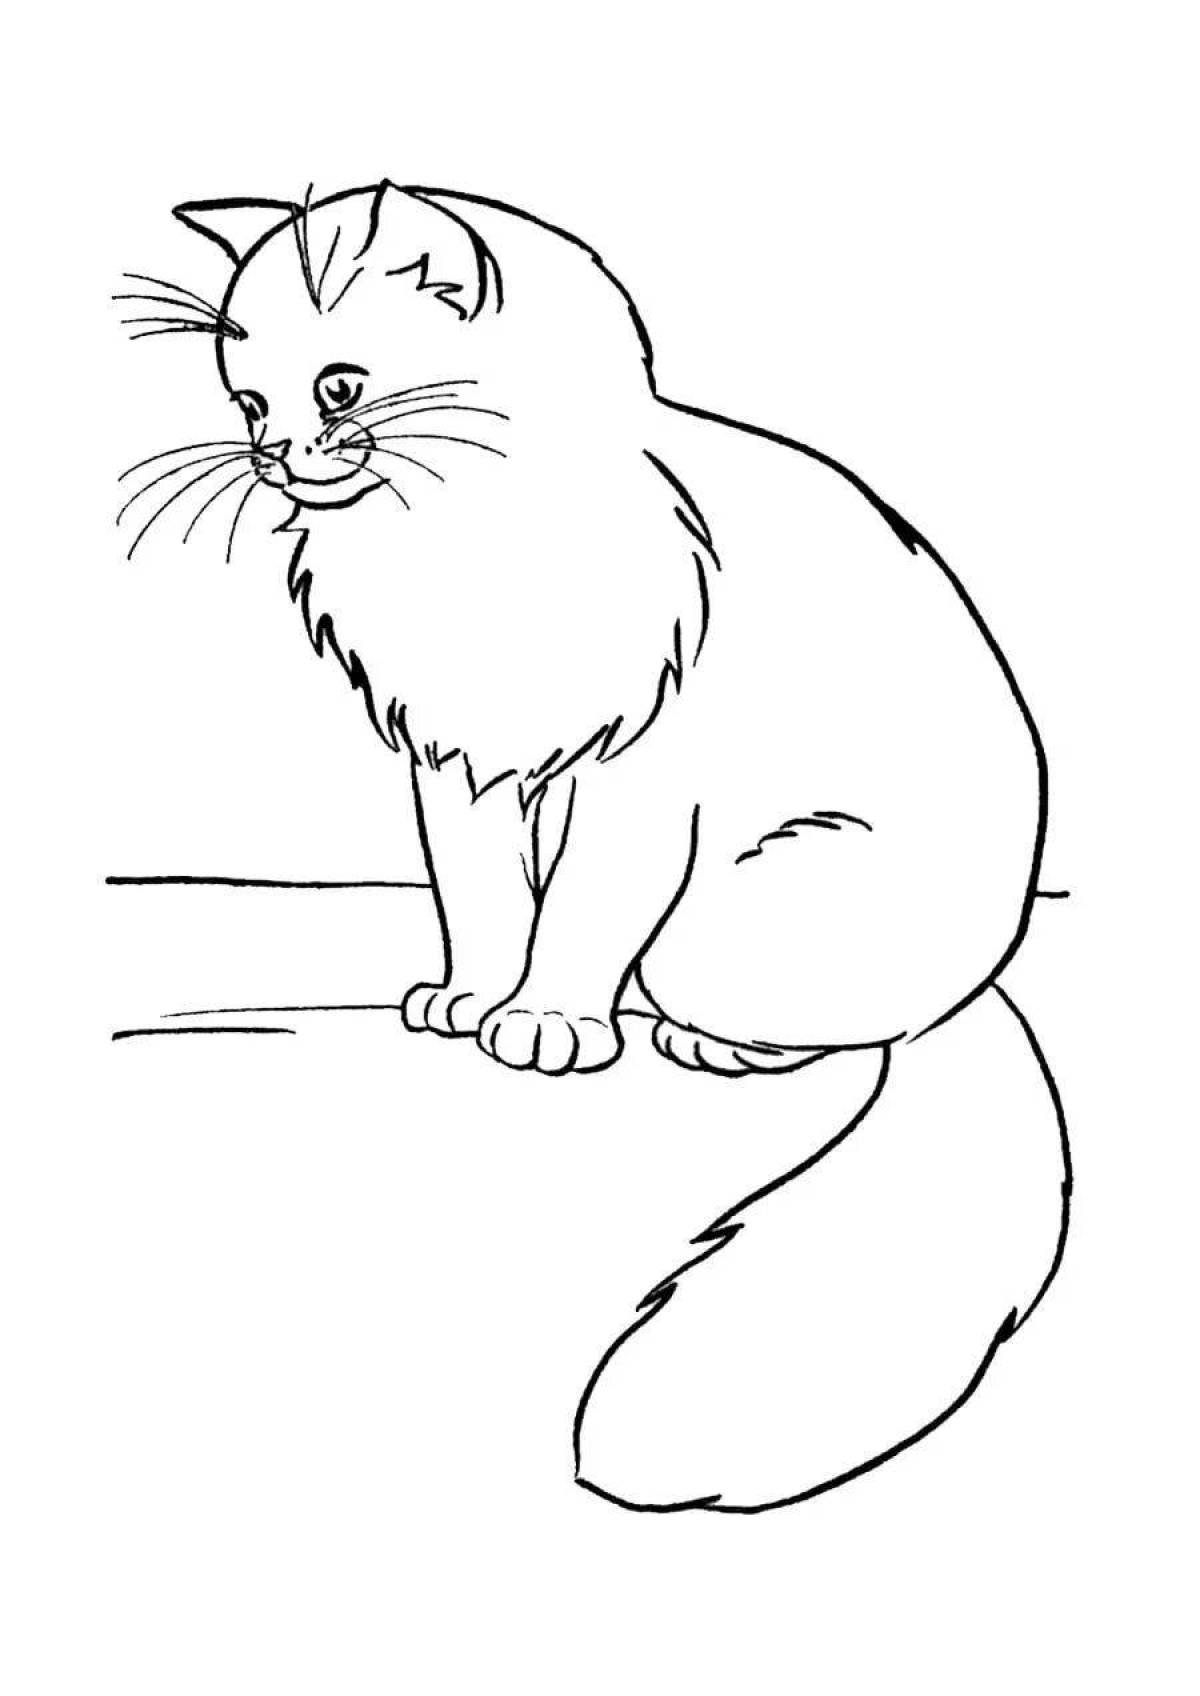 Exquisite cat coloring page